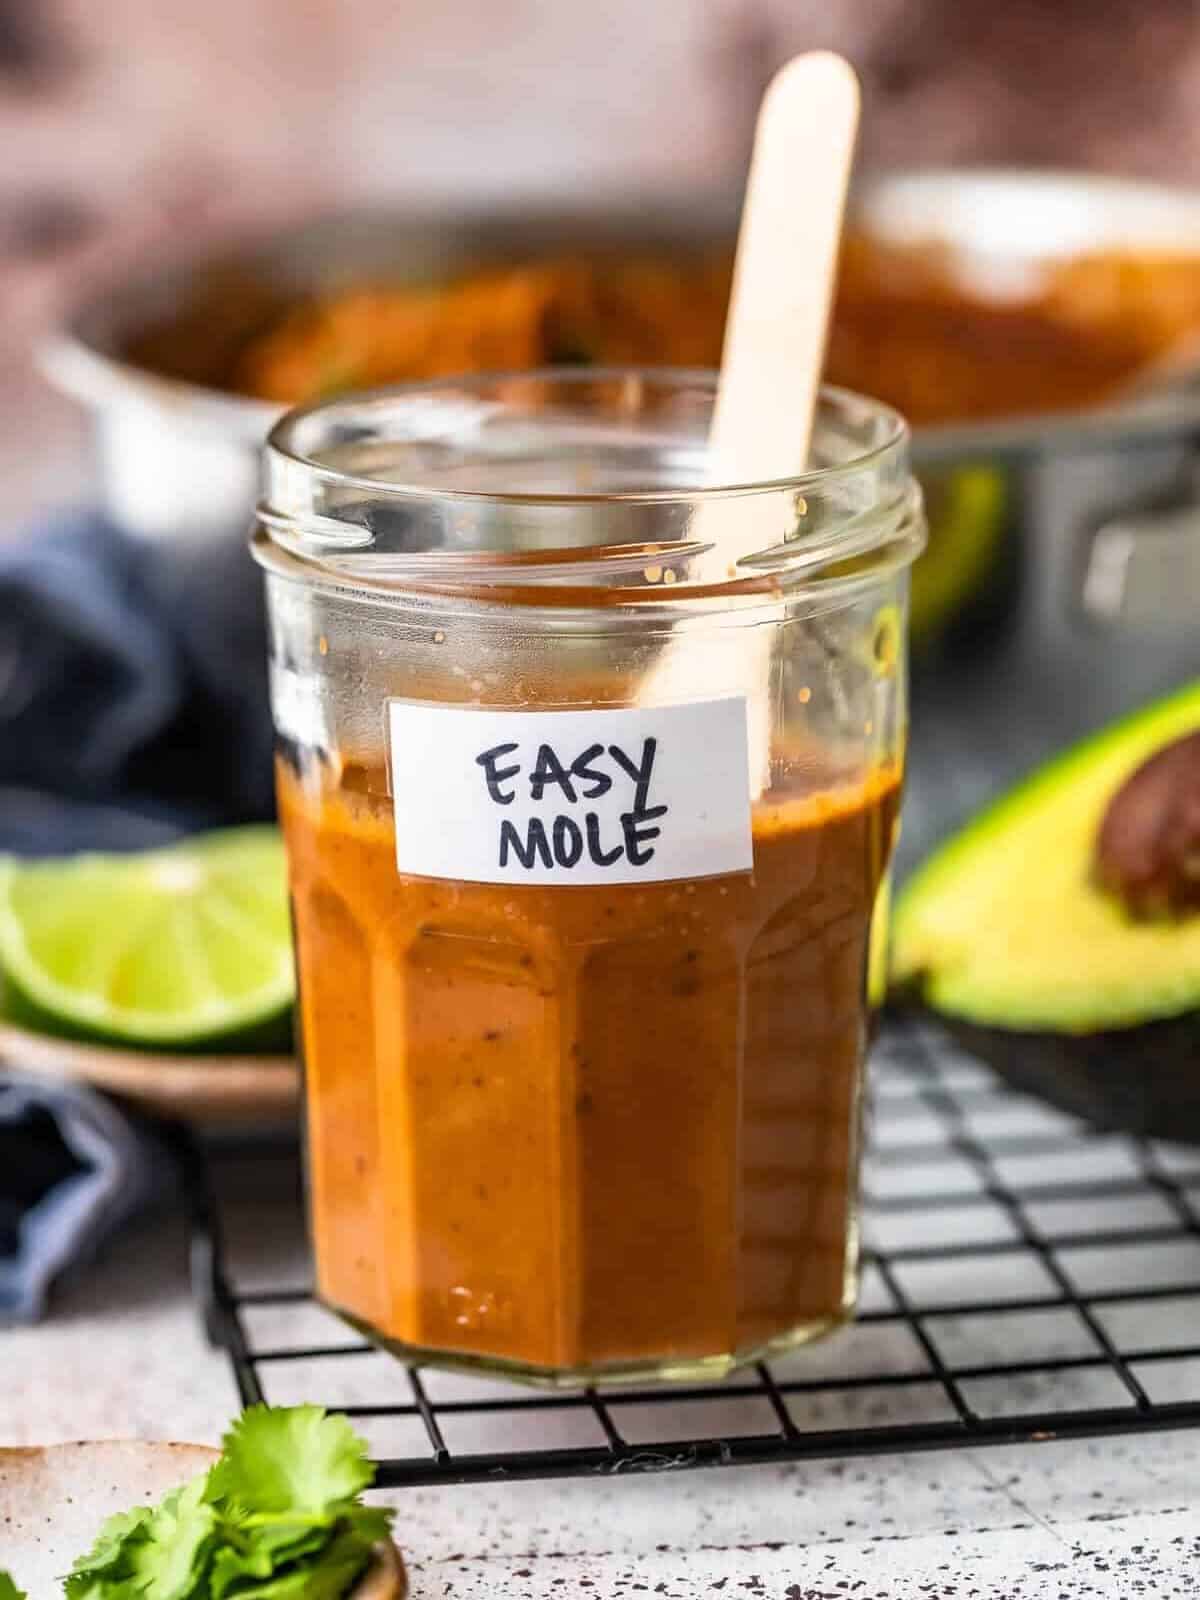 Easy Mole Sauce is such a great addition to your favorite meals! We love Chicken Mole and learning how to make this Homemade Mole Sauce has made all the difference for our best Mexican recipe!